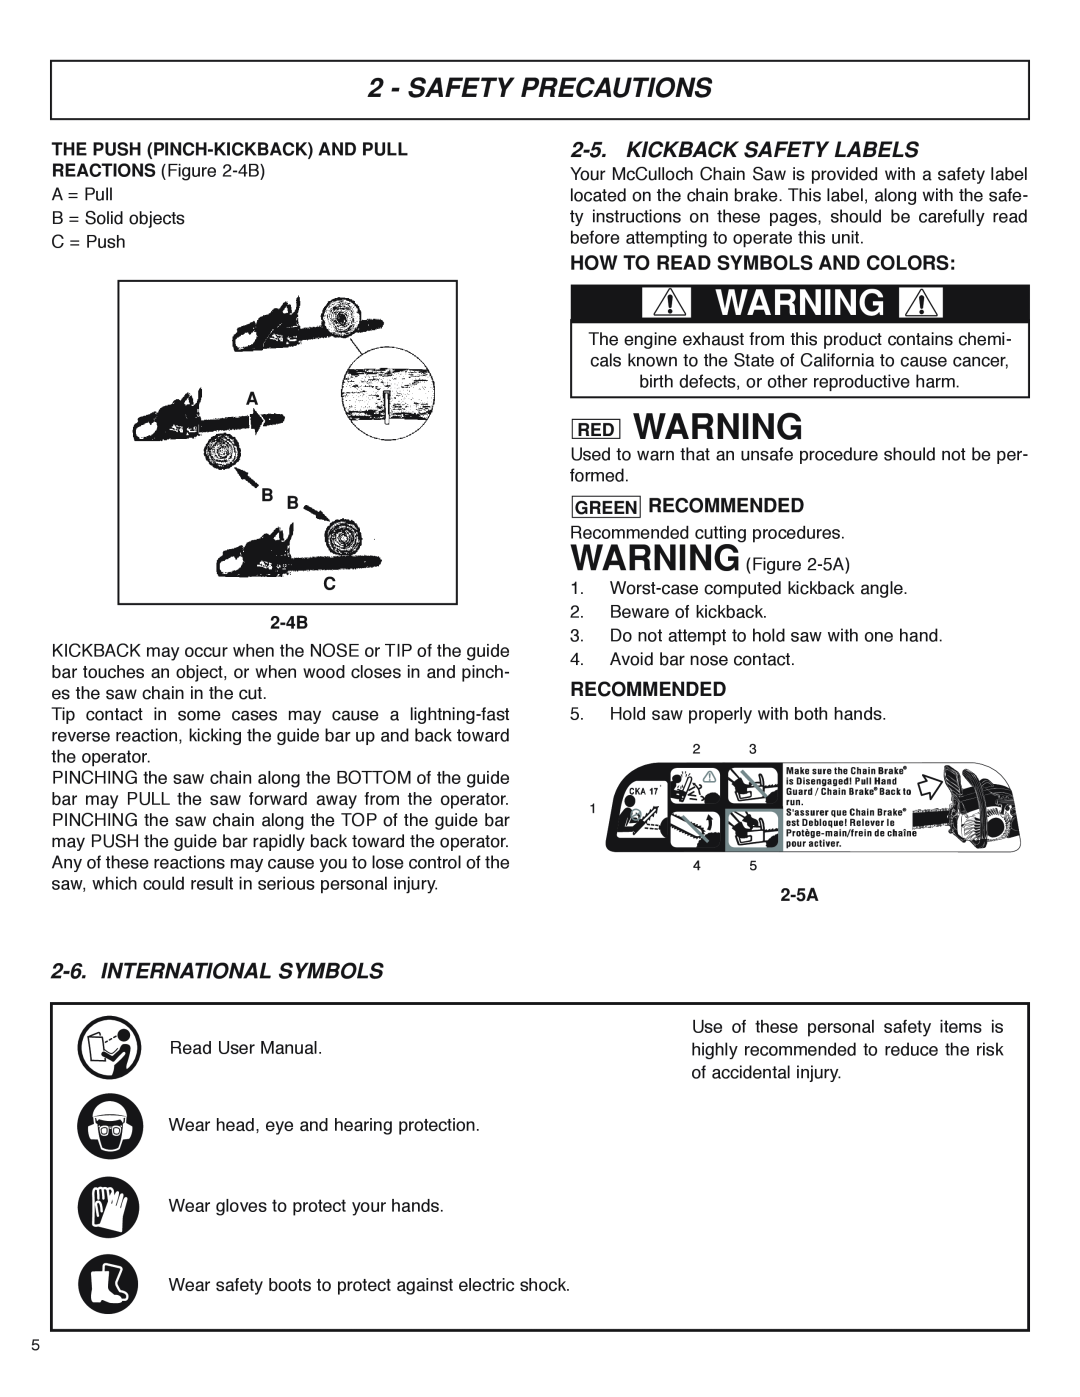 McCulloch MS4016PAVCC, MS4018PAVCC Red Warning, Kickback Safety Labels, International Symbols, Green Recommended, 2-5A 